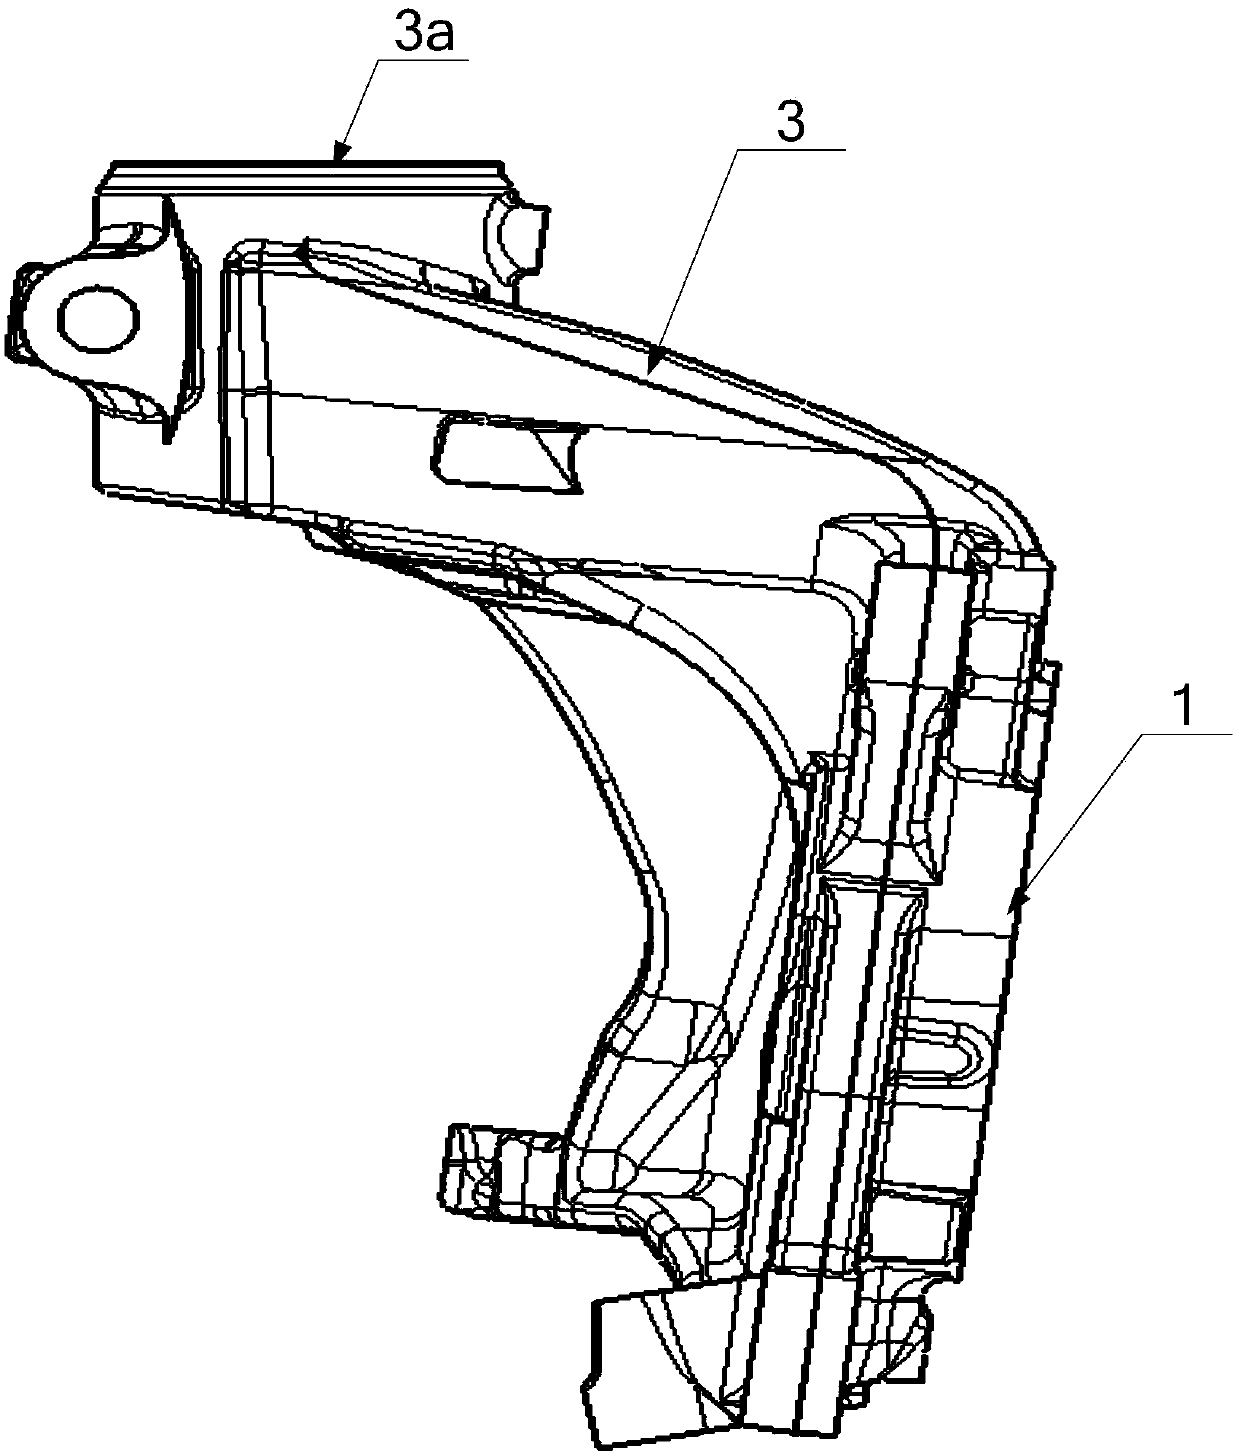 Vehicle and knuckle thereof